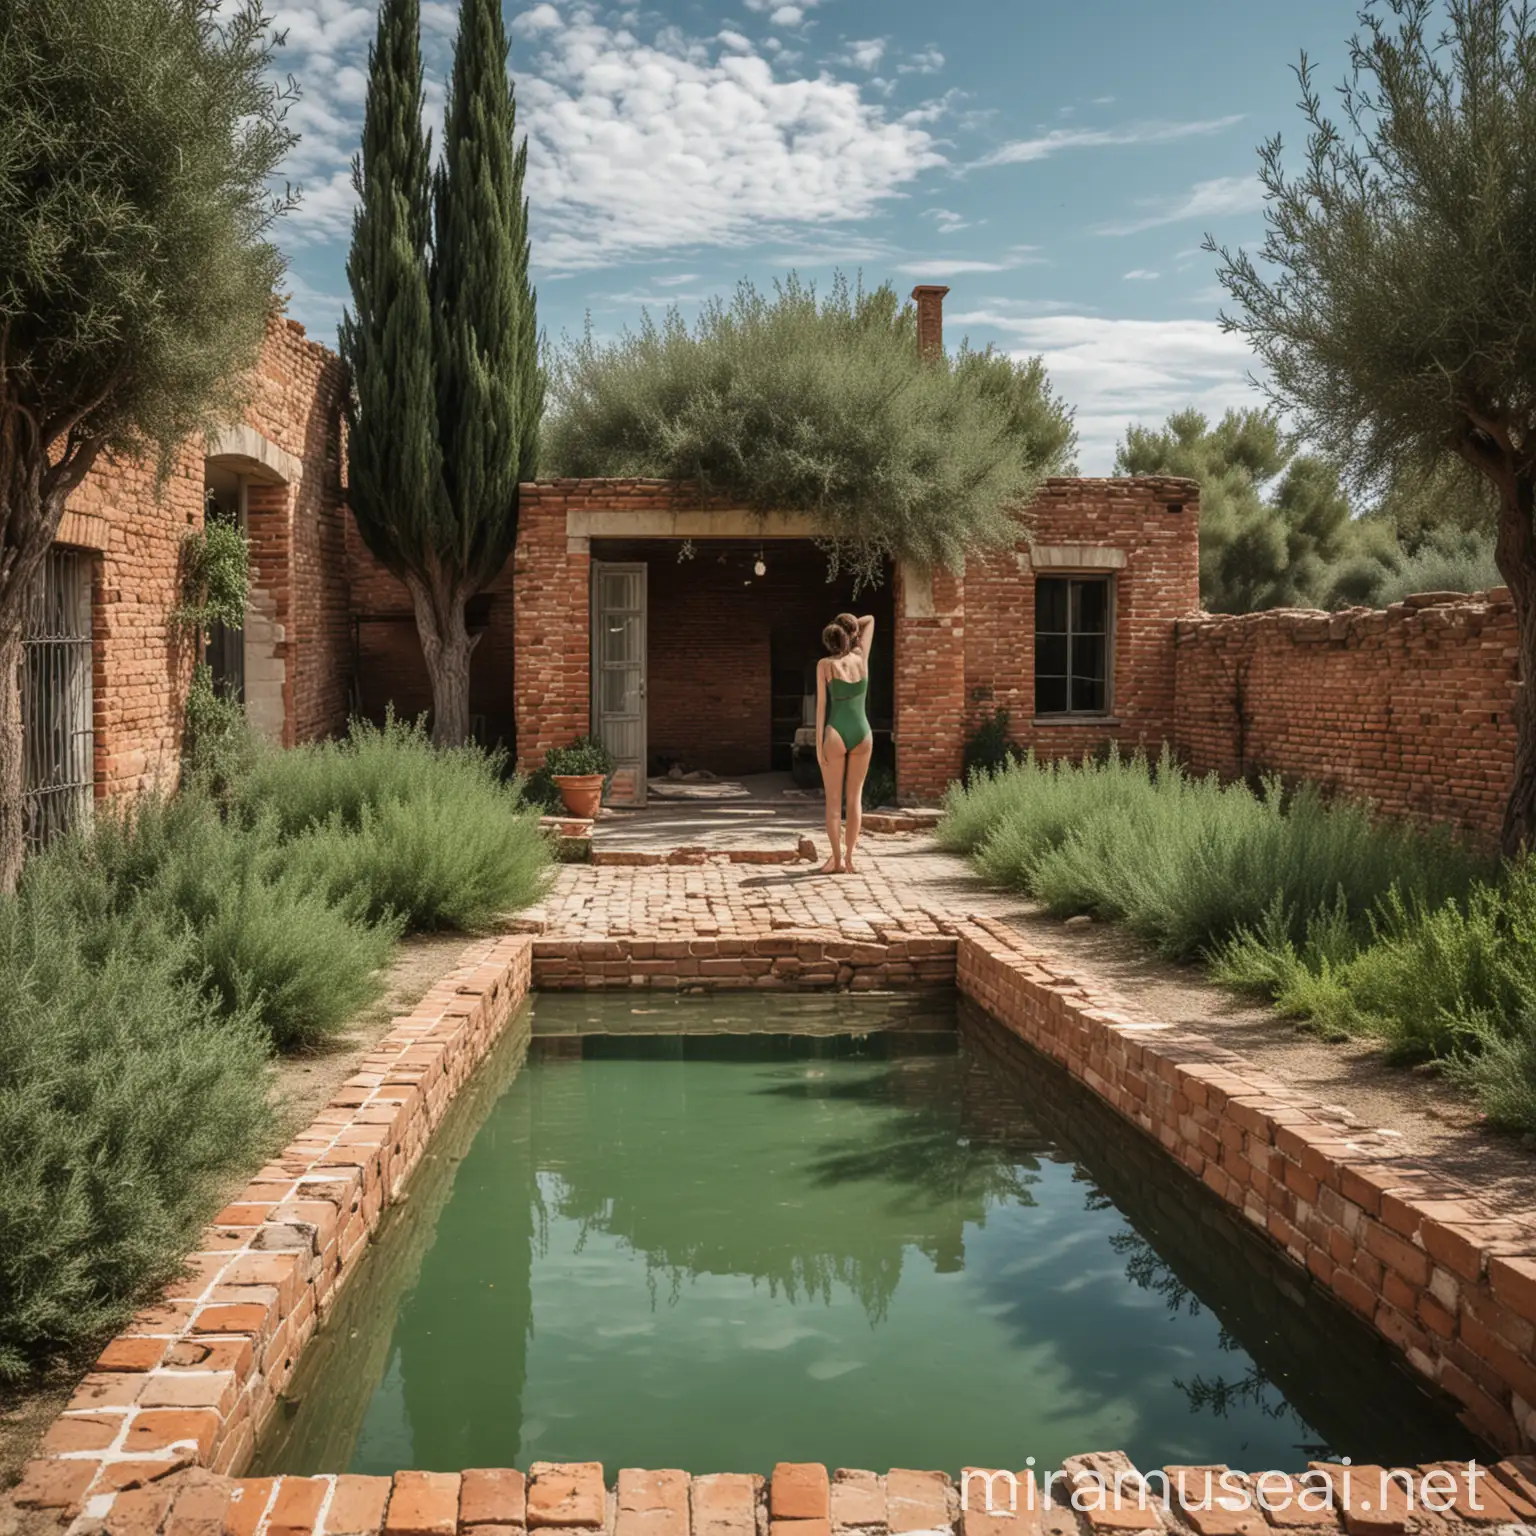 minimalism style little thermal pool outside with a woman alone bathing wearing a green swimsuit, in dry mediterranean garden, inside a large, dilapidated, ancient of 1700, roofless, italian building made of bricks, gravel floor, herbs, olive trees, cypress trees, rosemary, seen from pool

